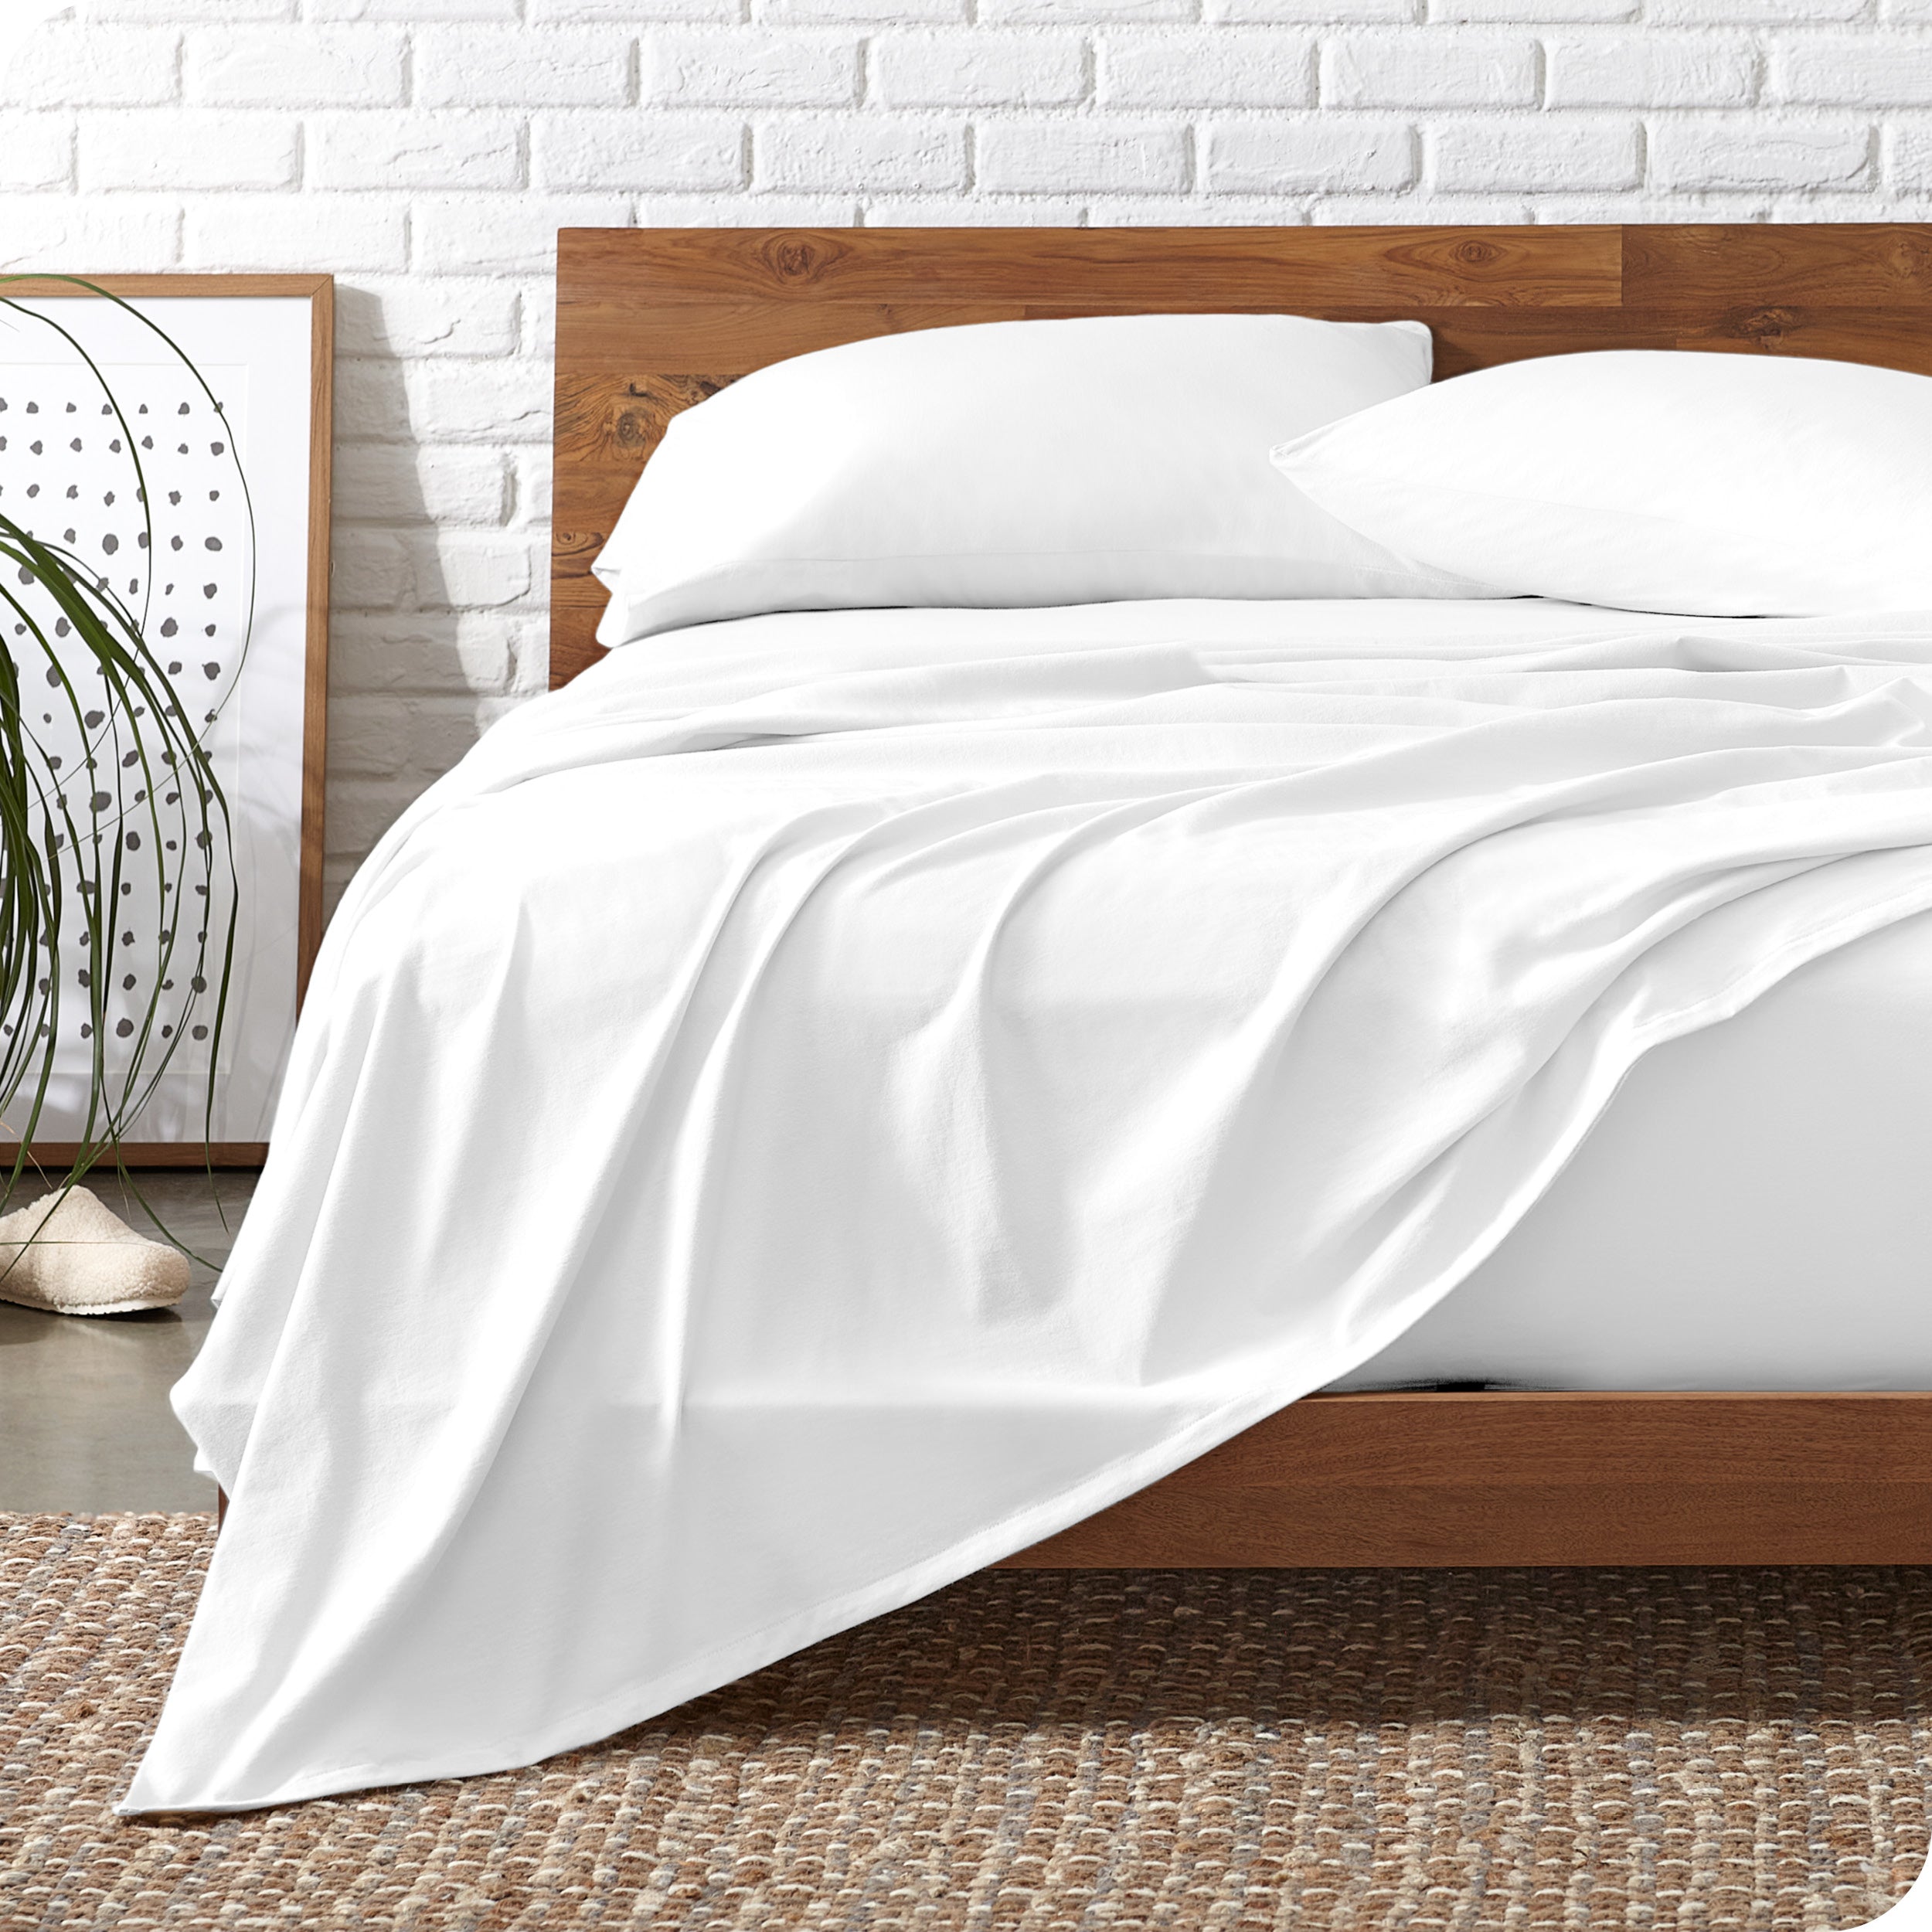 Wooden bed frame with white organic cotton jersey sheets on the bed